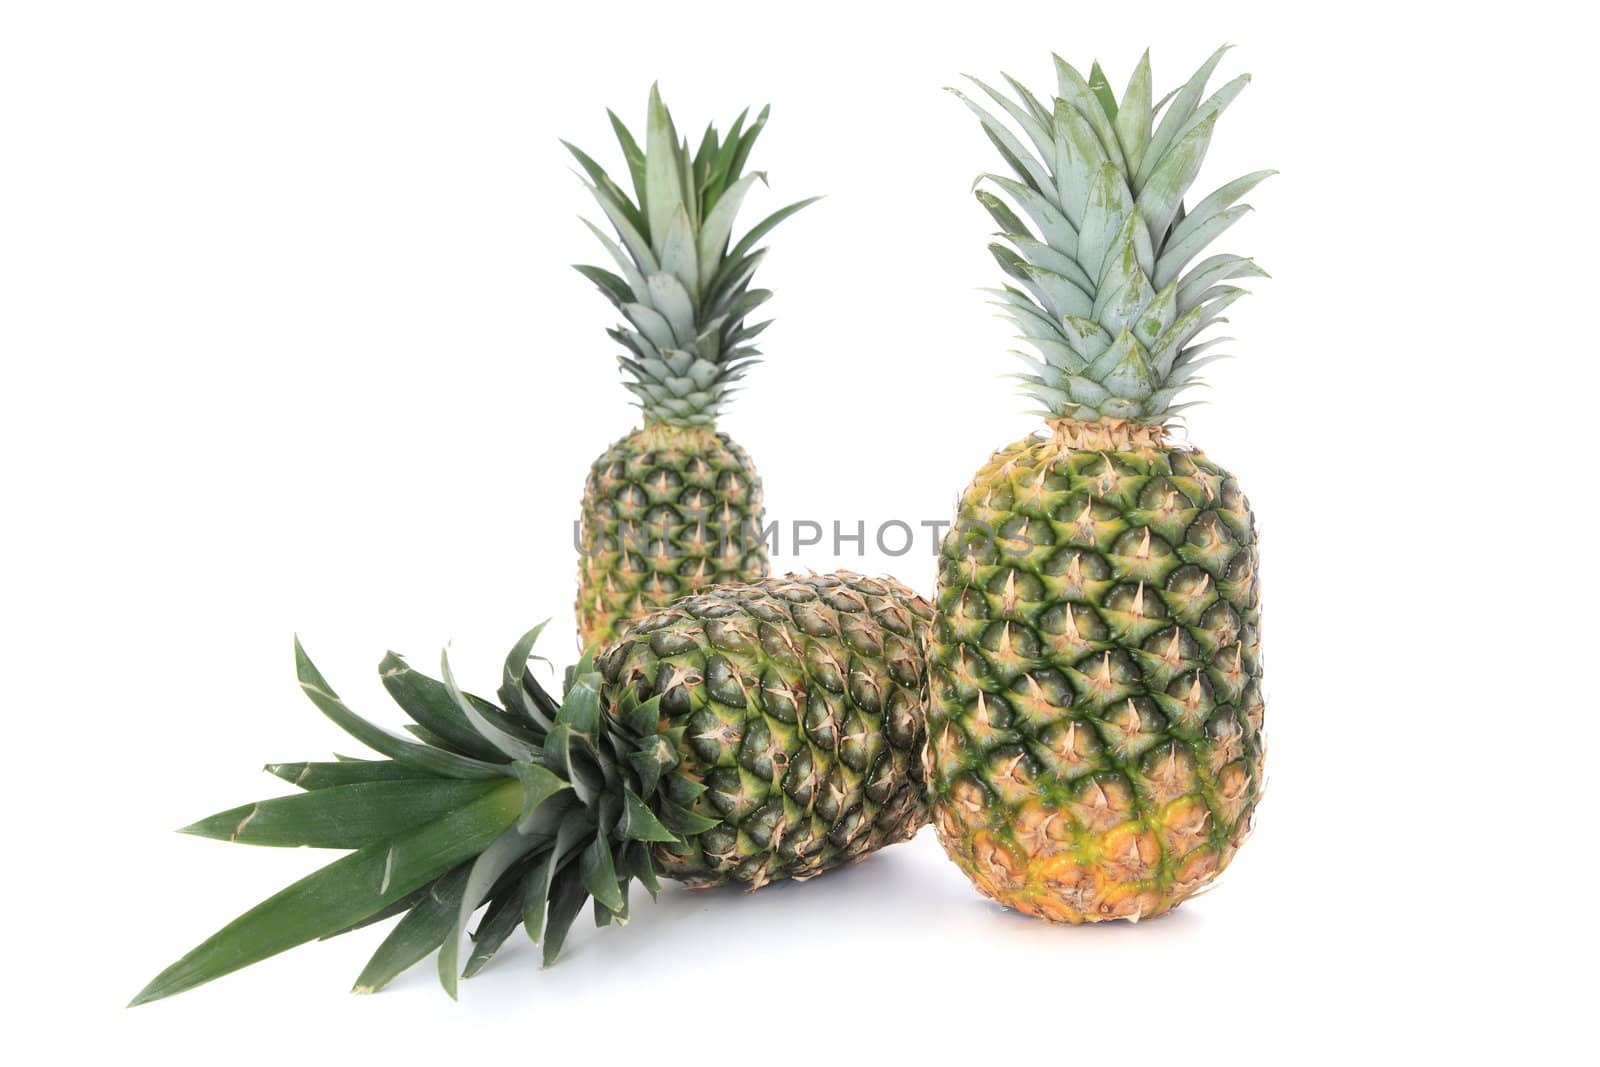 Ripe pineapples on white background.